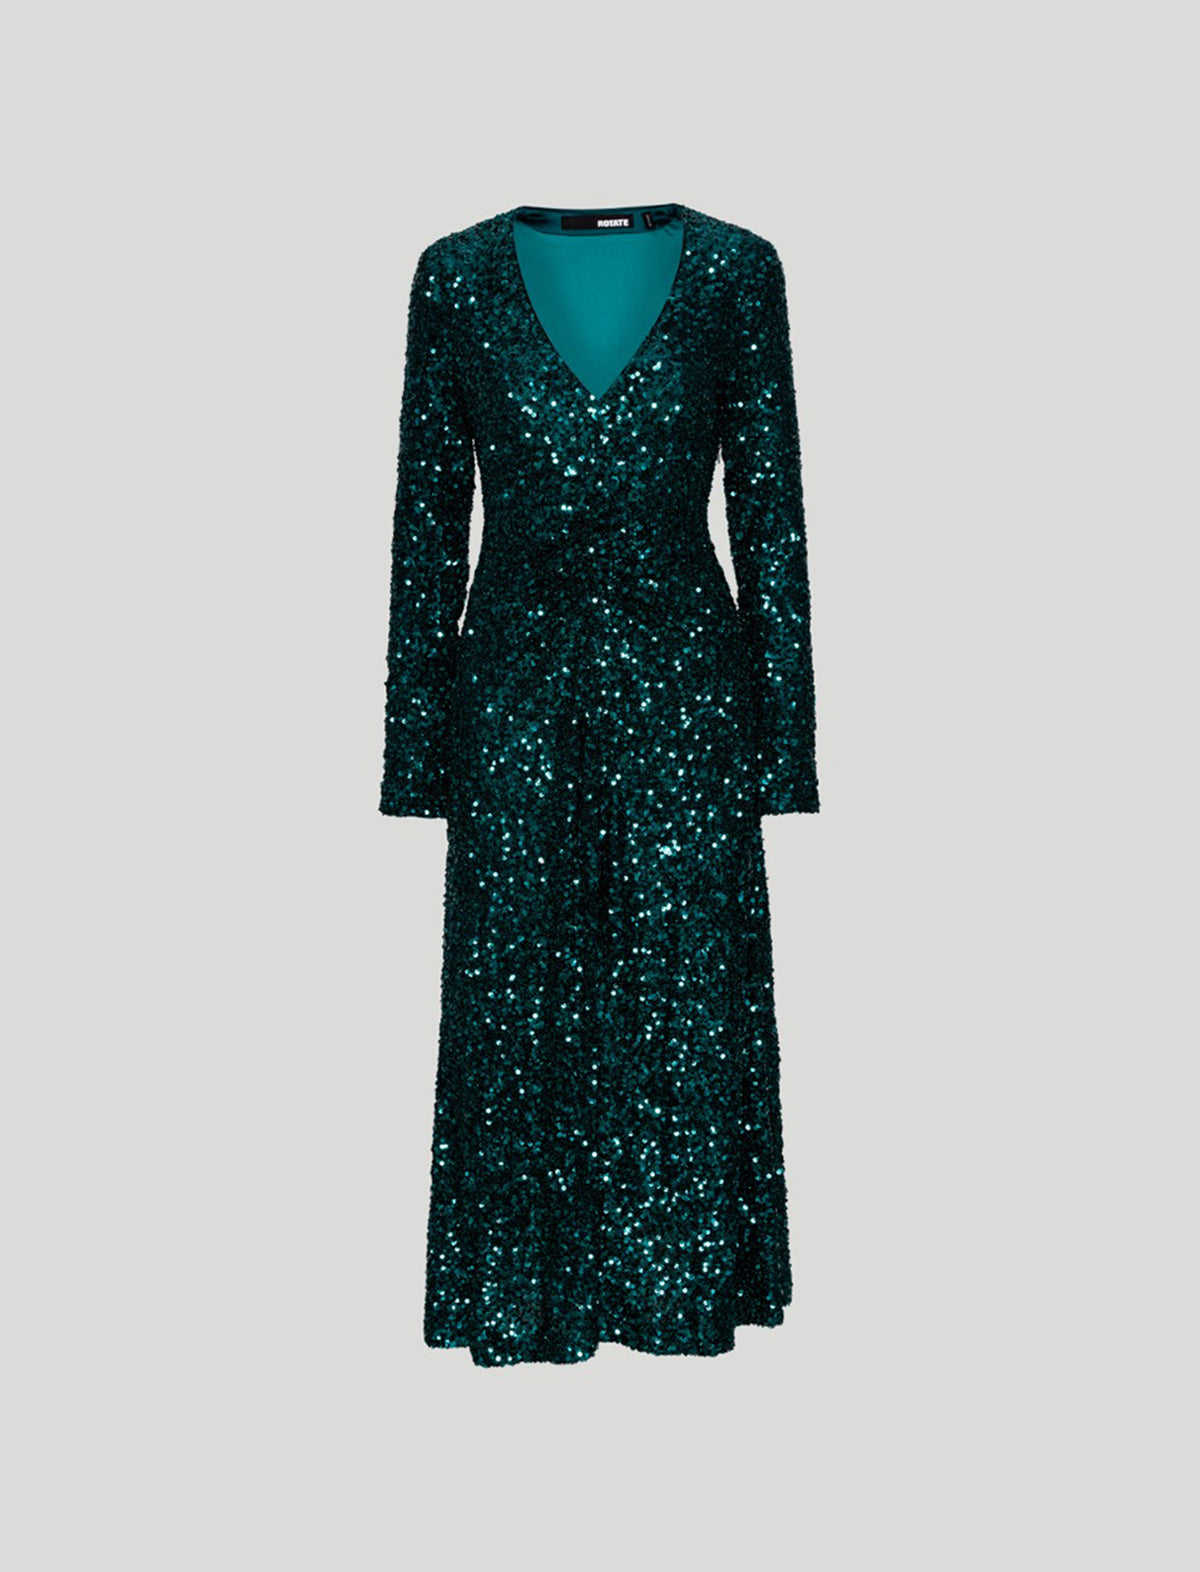 ROTATE Holiday Sierra Sequin Slit Dress in Teal